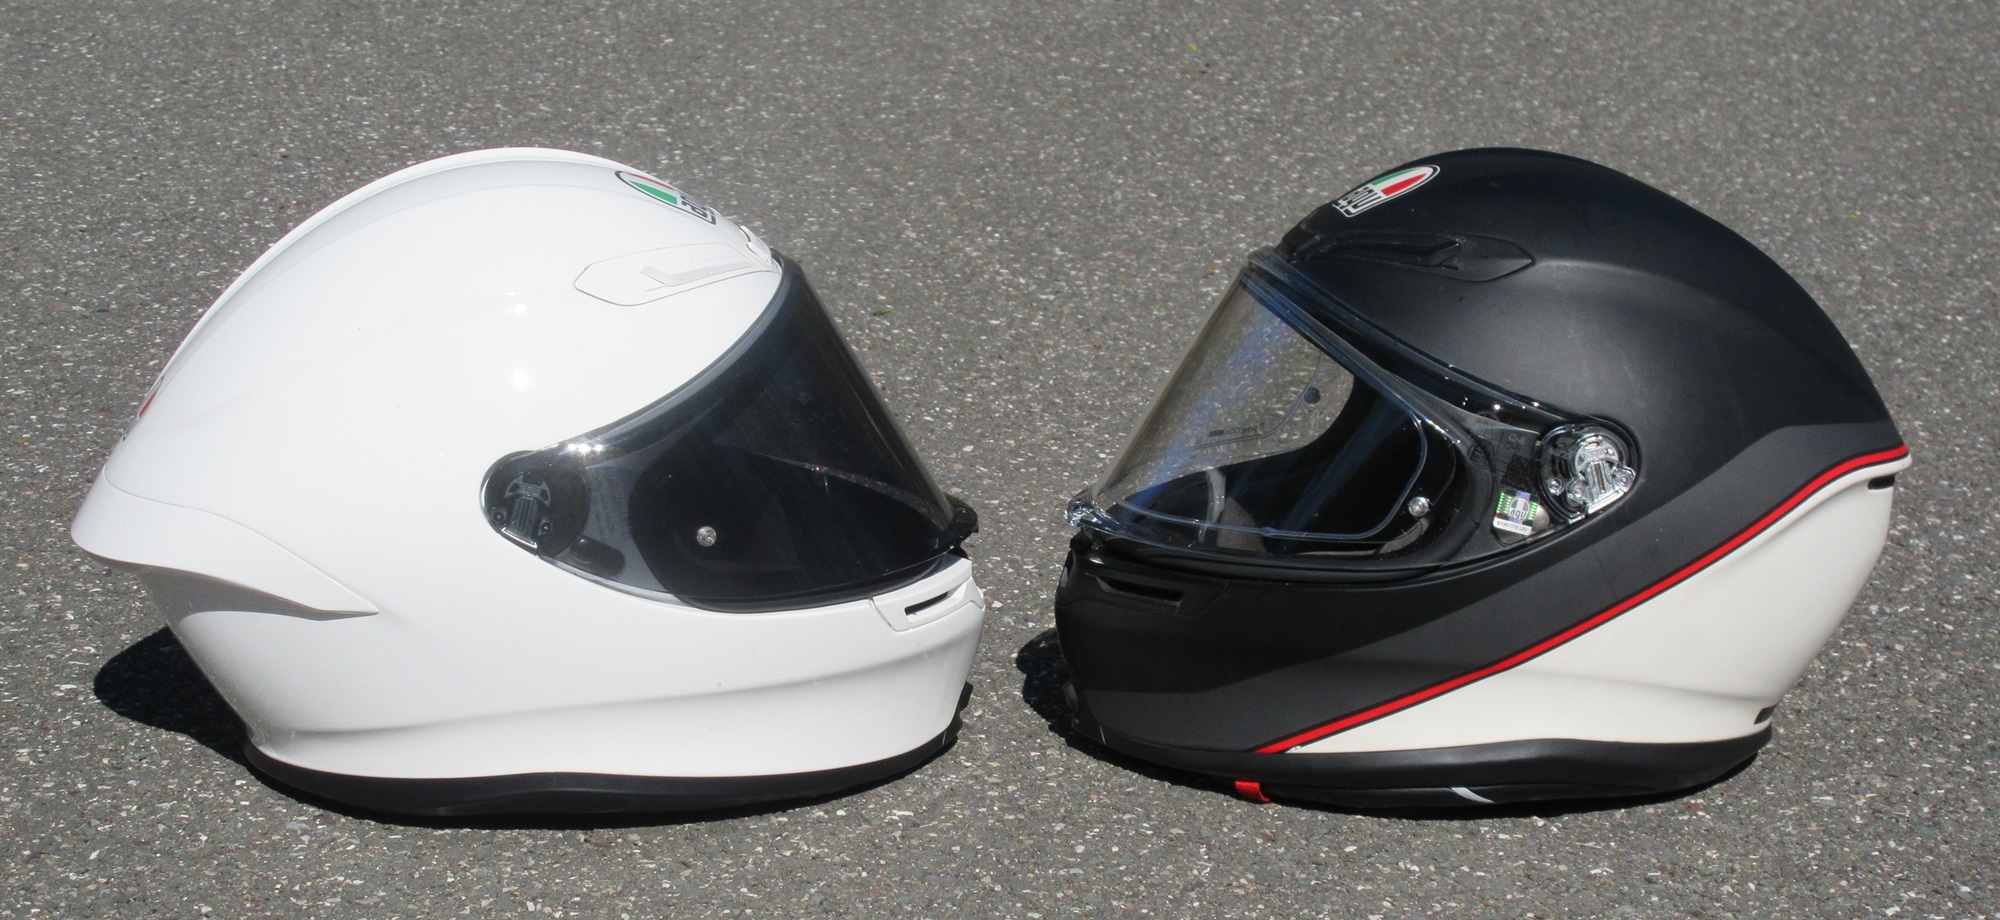 AGV K6 and K6 S helmets side by side